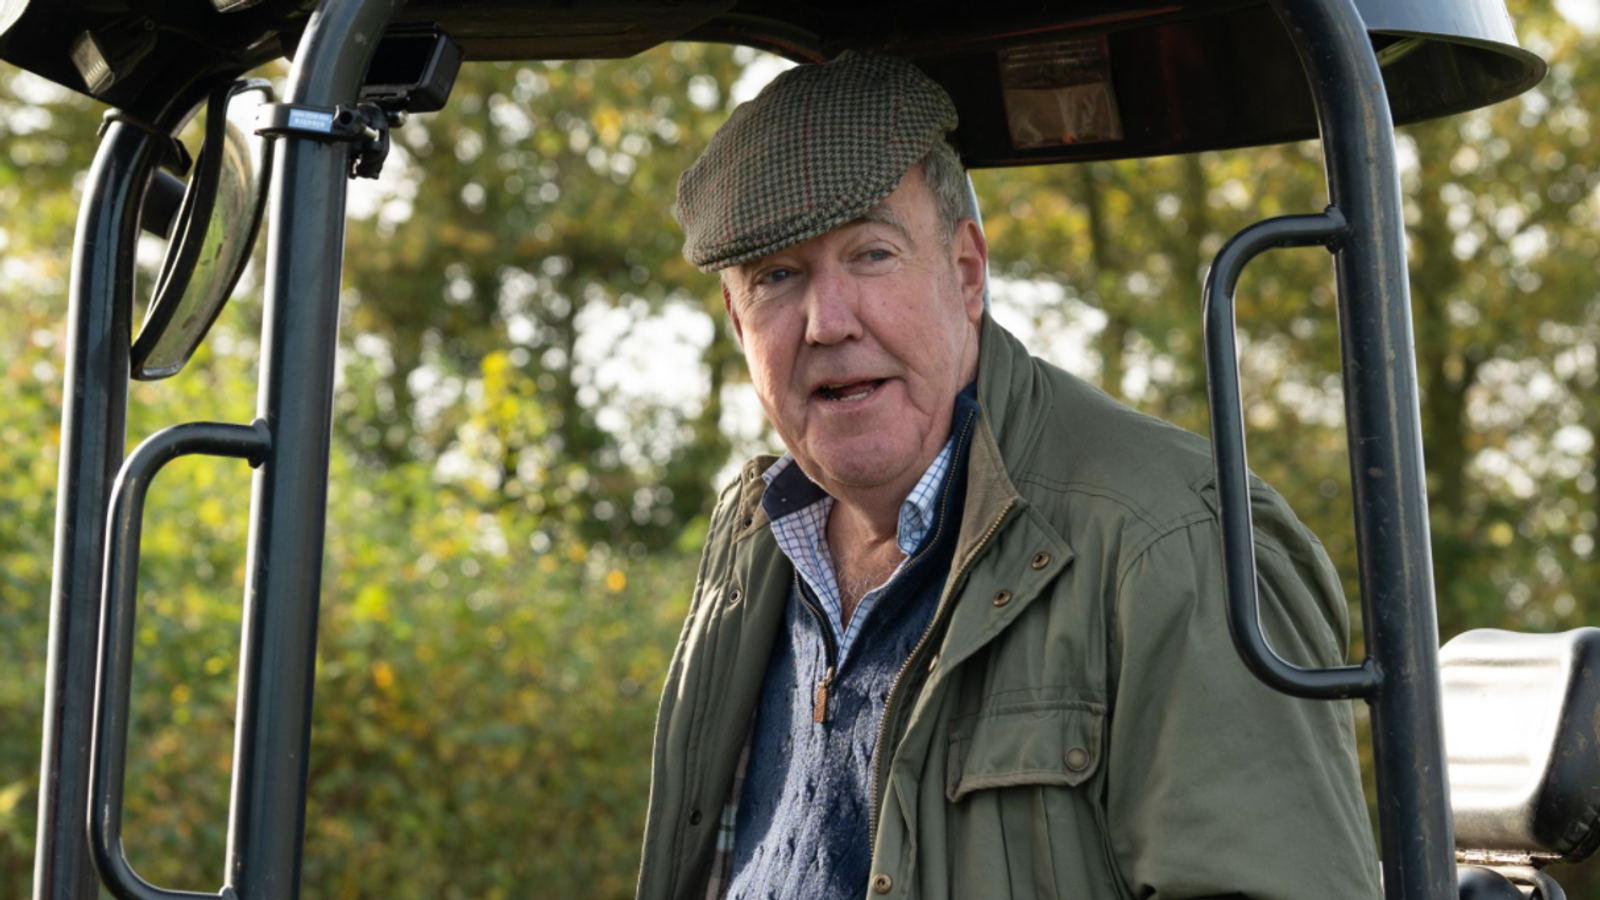 Jeremy Clarkson ordered to close dining areas at Diddly Squat Farm in Oxfordshire over alleged planning law breach